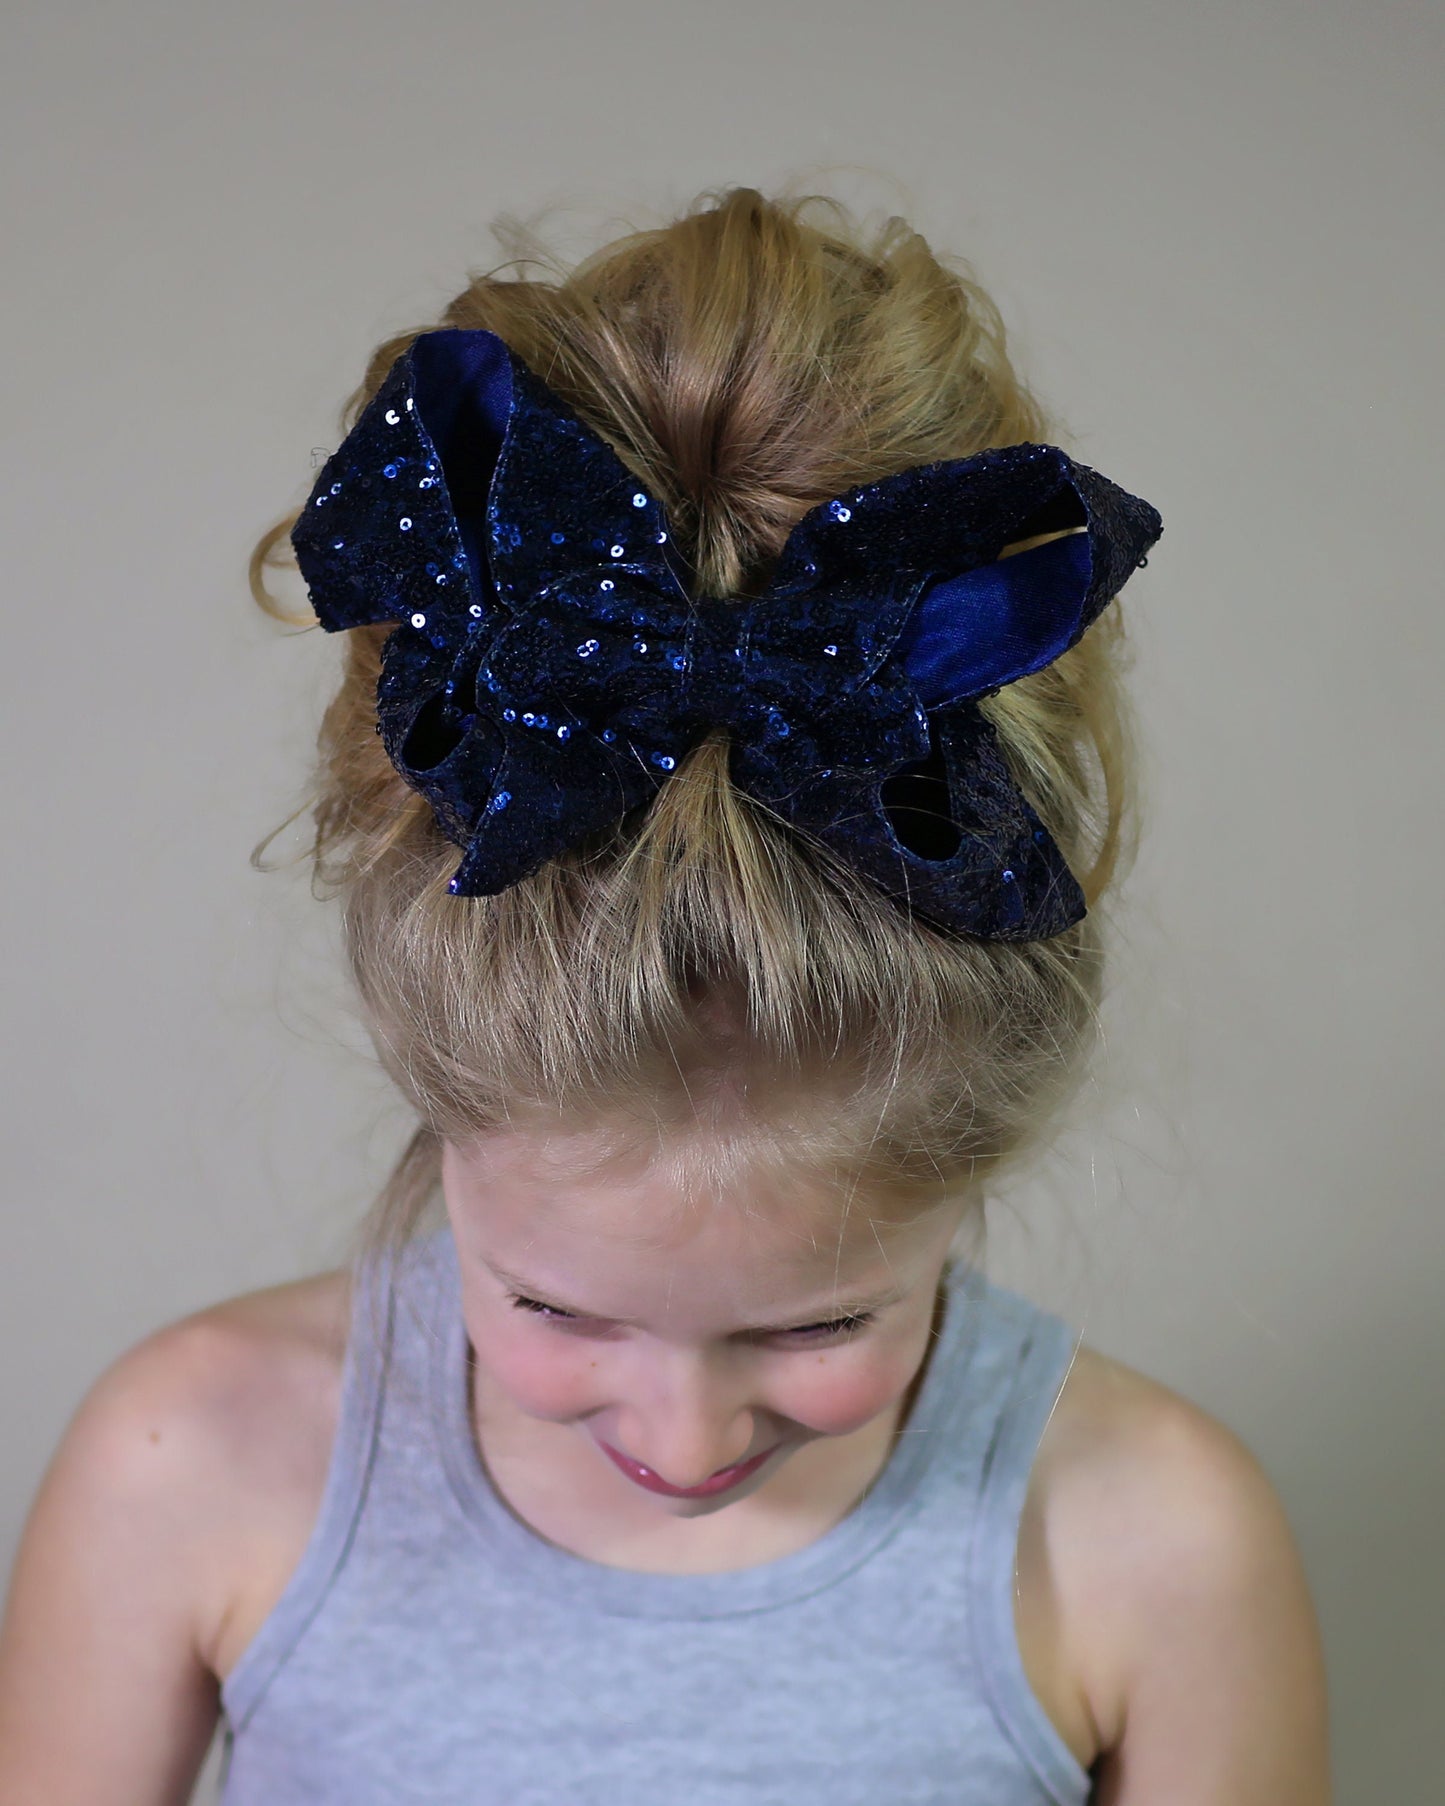 Large Sequin Navy Bow Clip - Large Sequin Bow Clip -  Large Navy Bow - Navy Bow - Oversized Sequin Cheer Bow